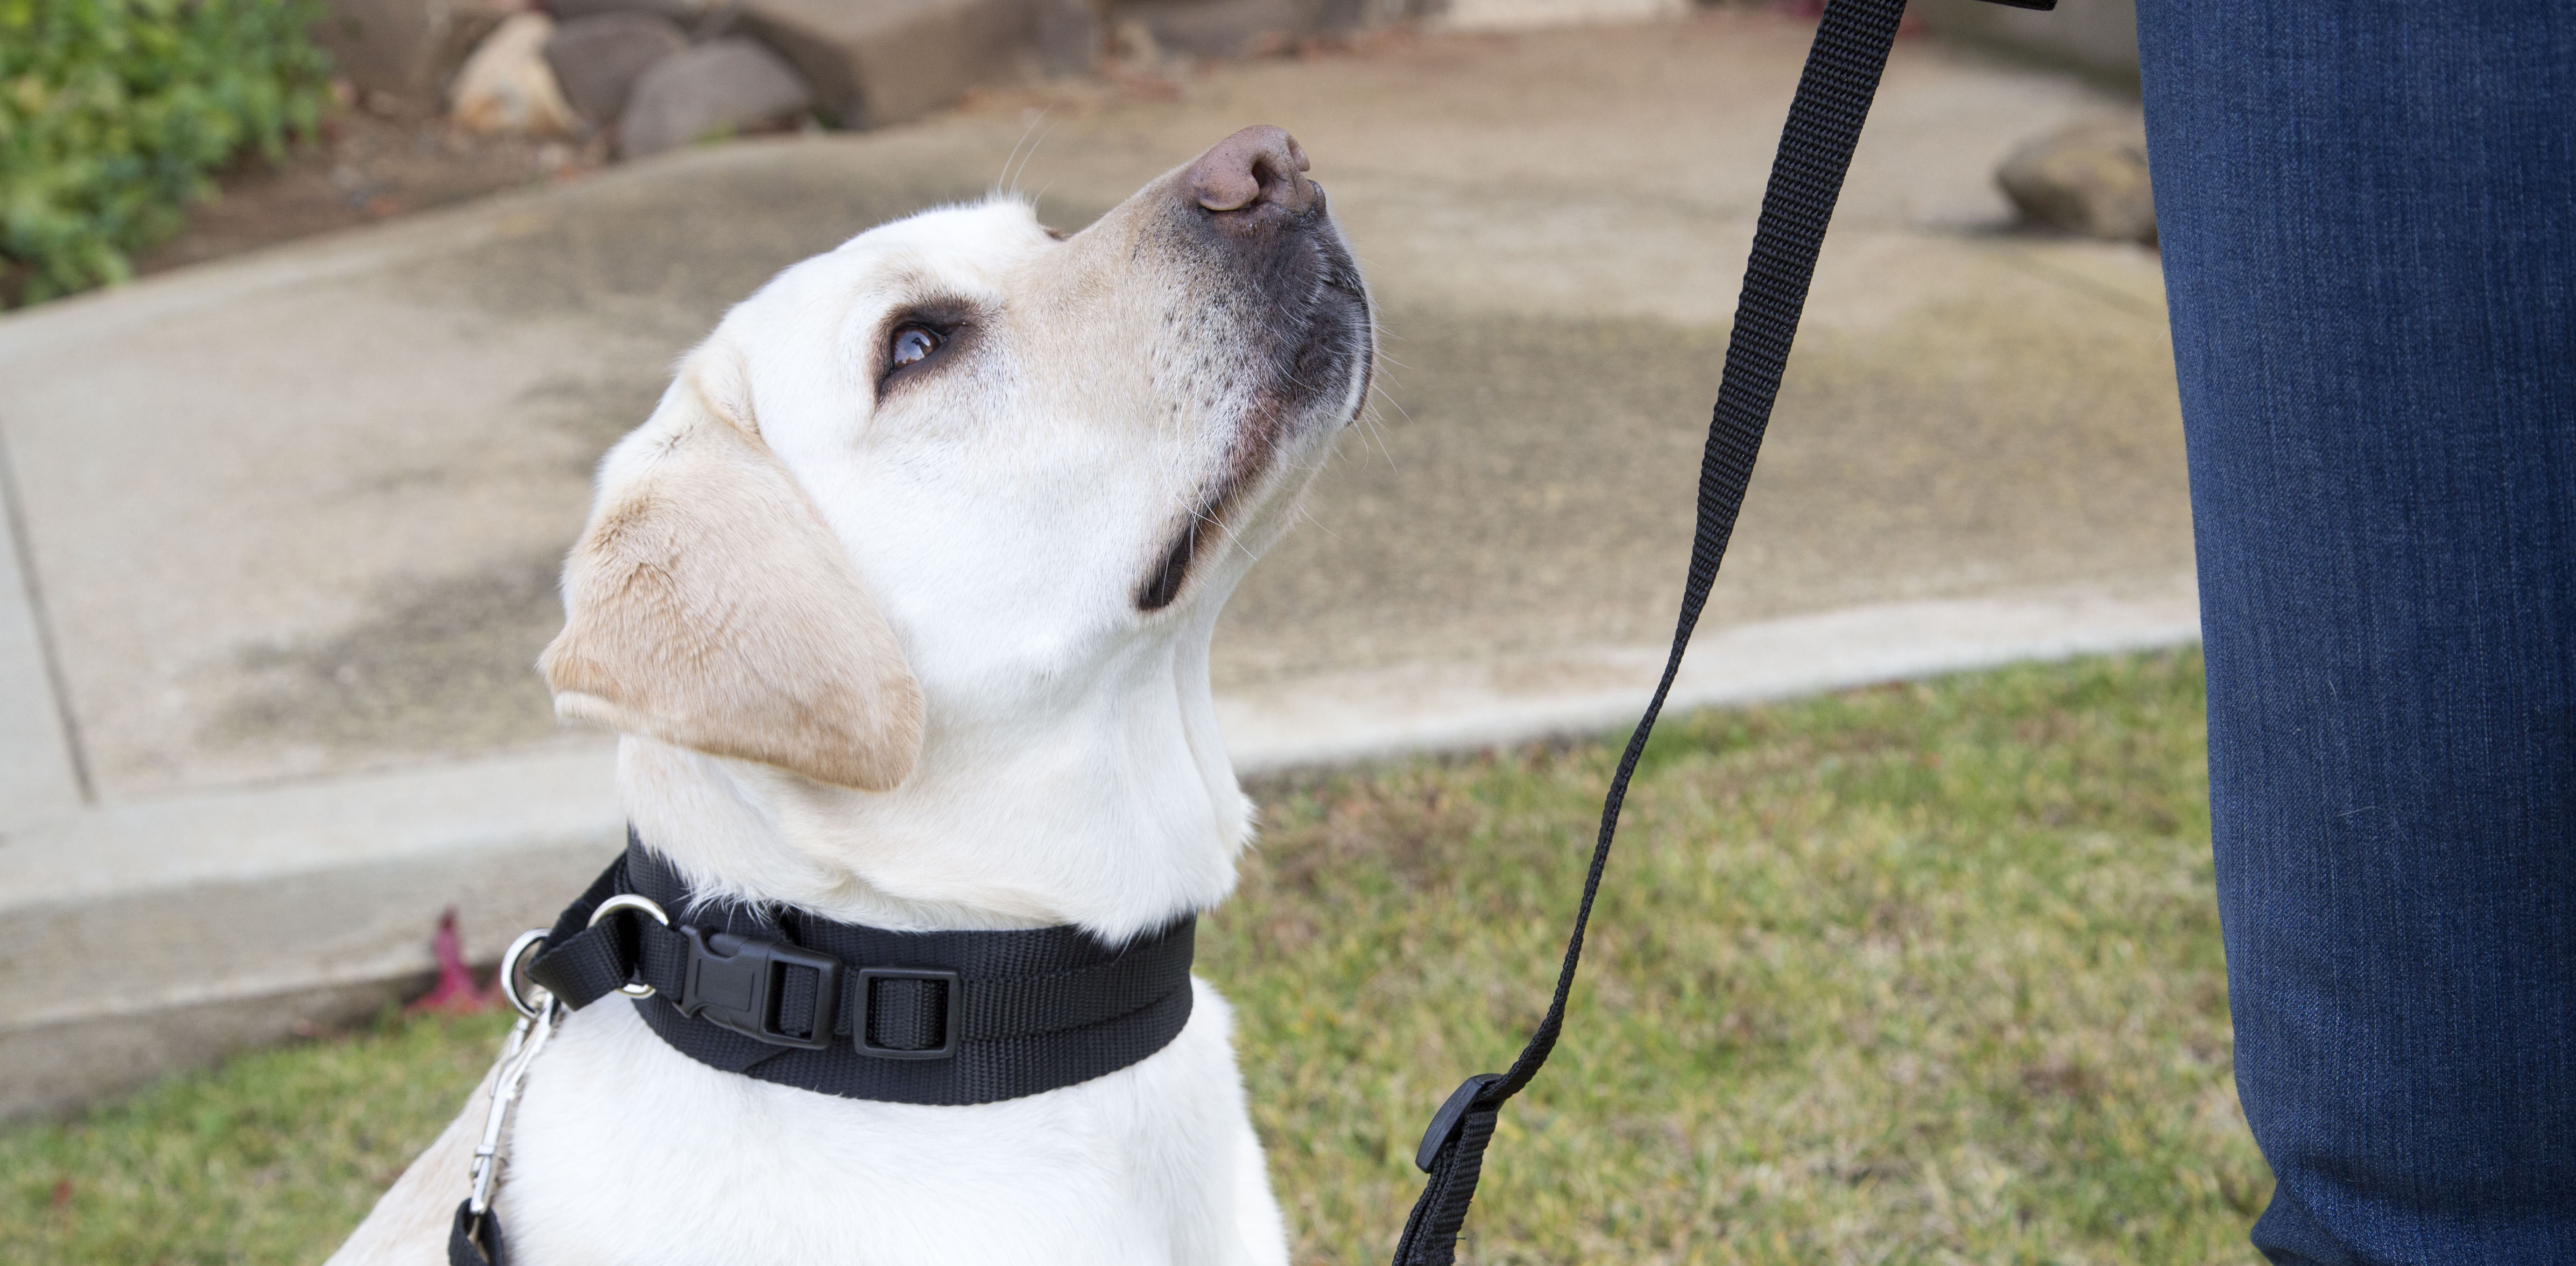 image of a white labrador dog looking up at a dog trainer